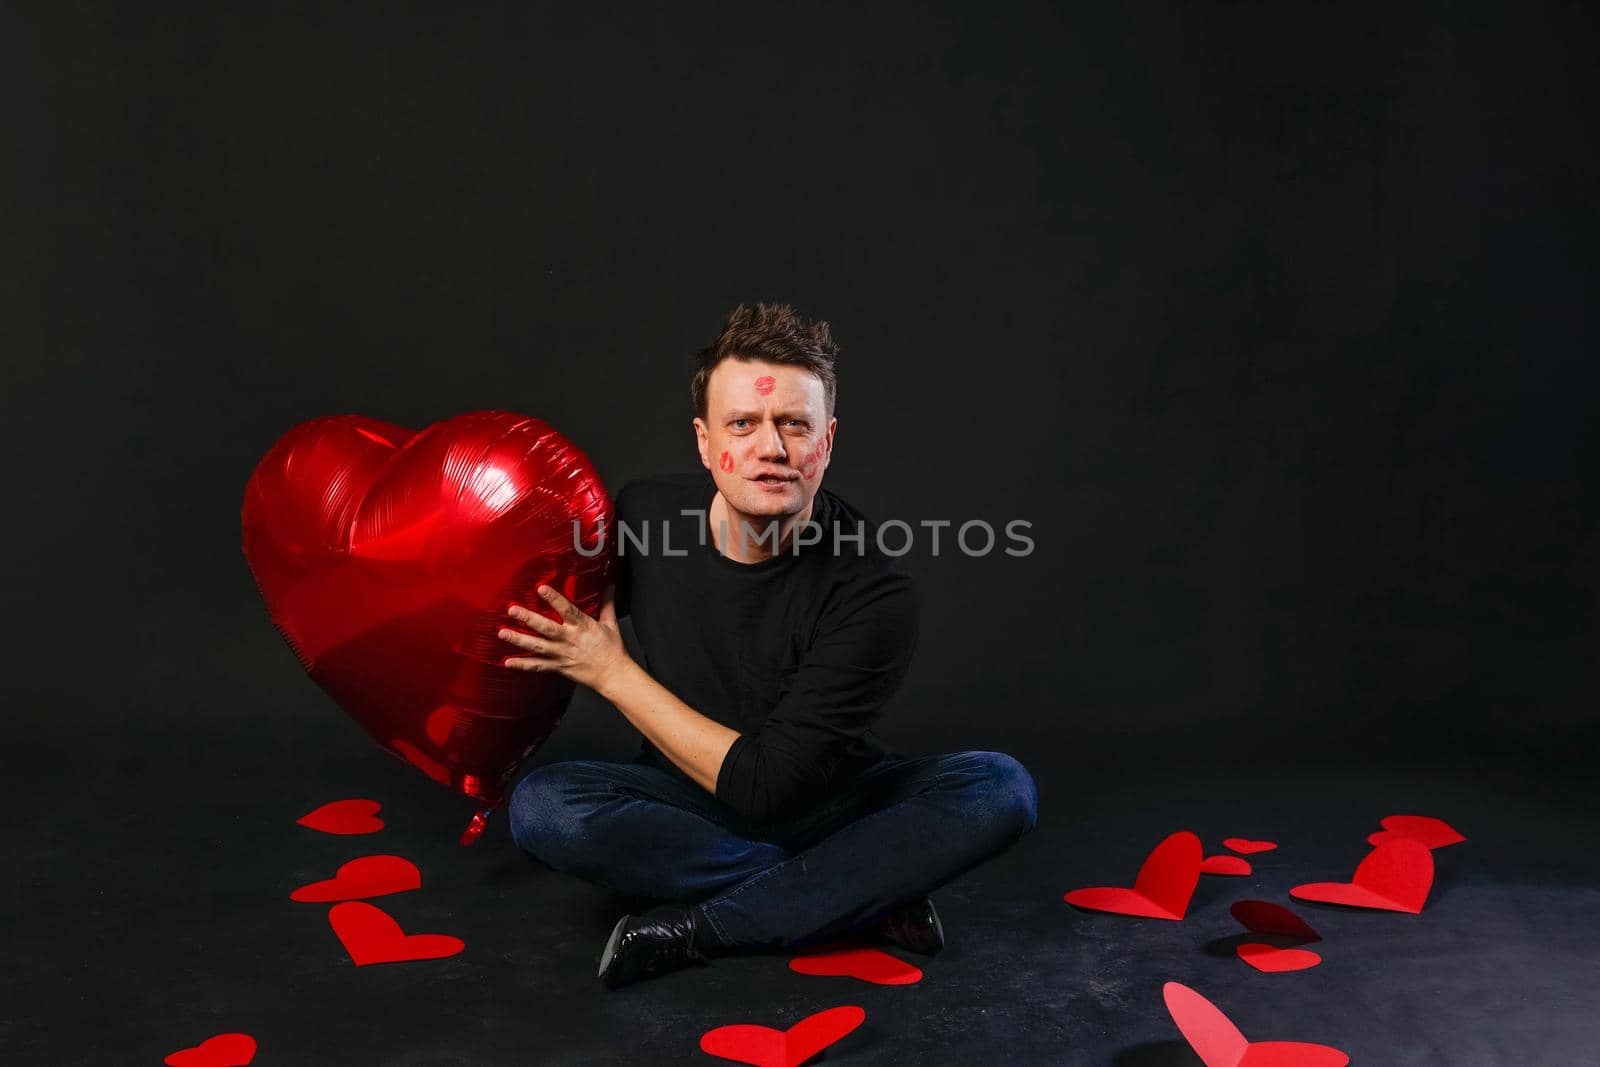 valentines red heart, balloon in hands, photogenic heterosexual. On black background lifestyle guy giving